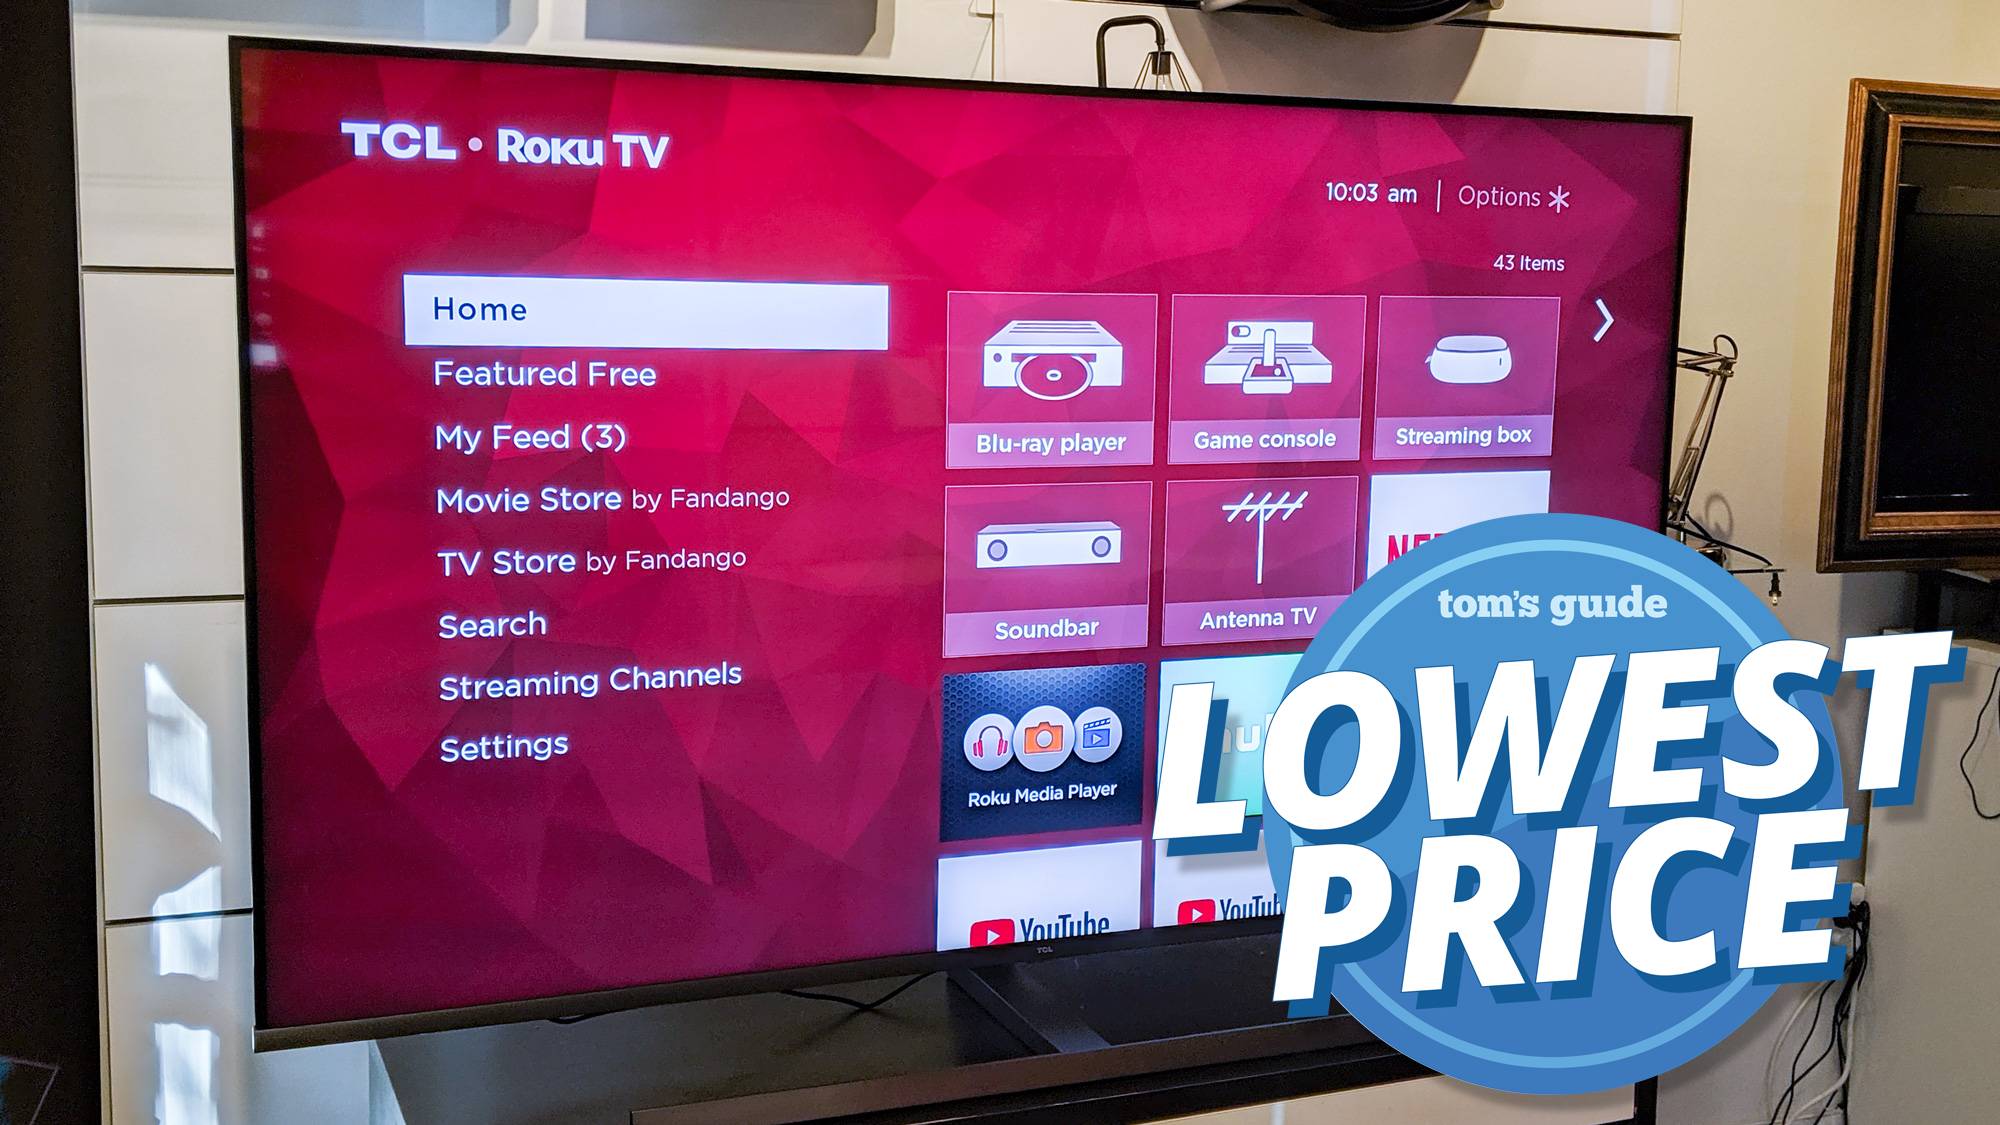 Massive 4th of July TV sale — TCL's amazing 65inch QLED TV is 50 off